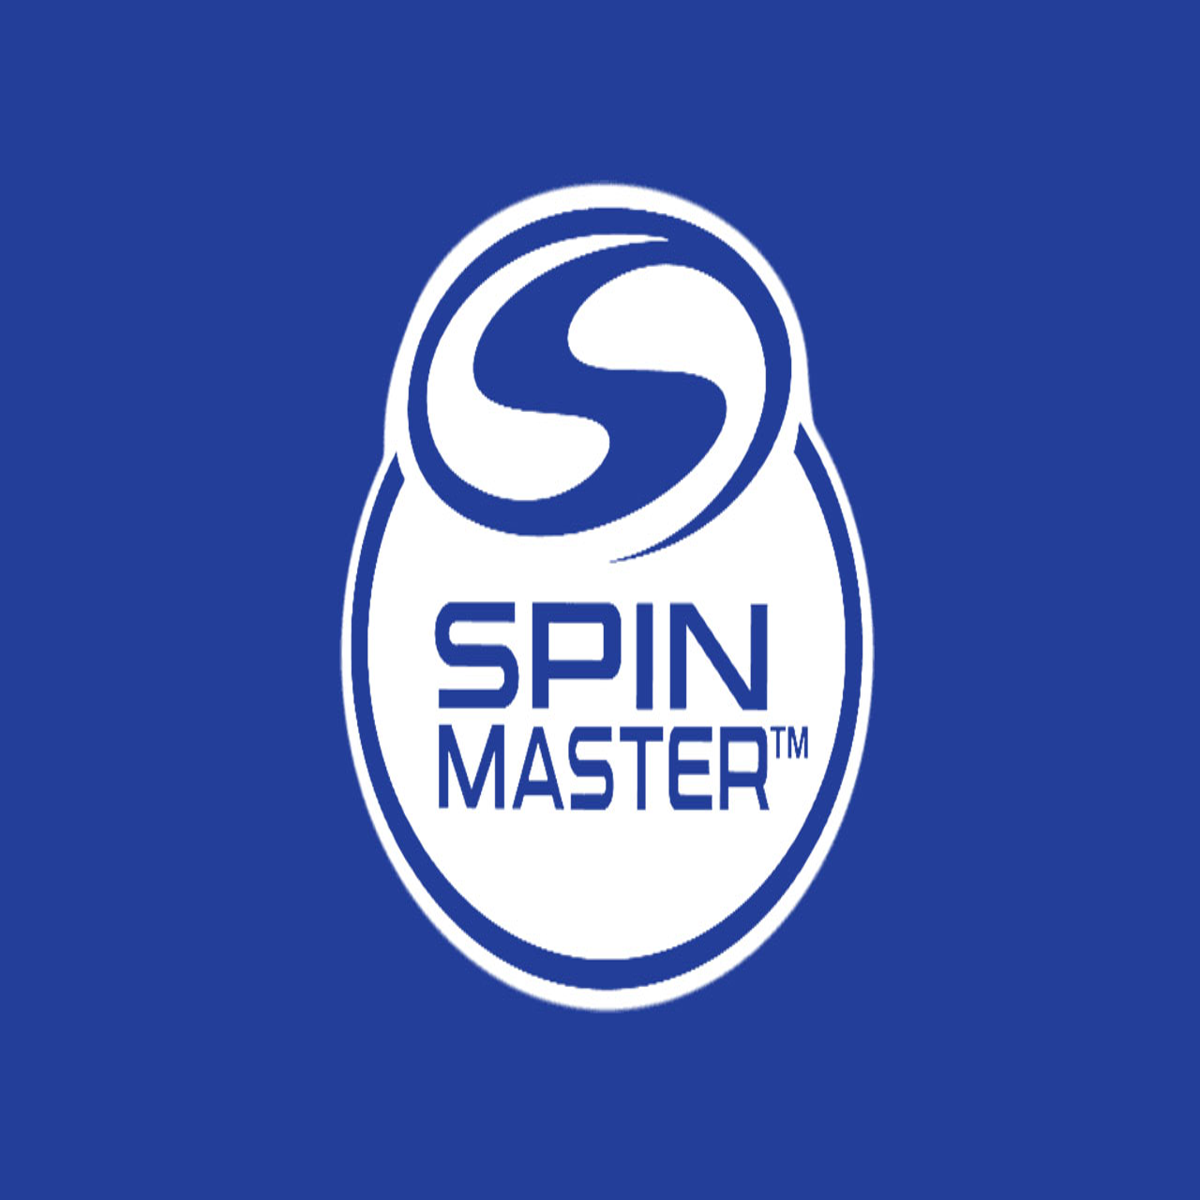 Proposed acquisition of Spin Master by Nintendo